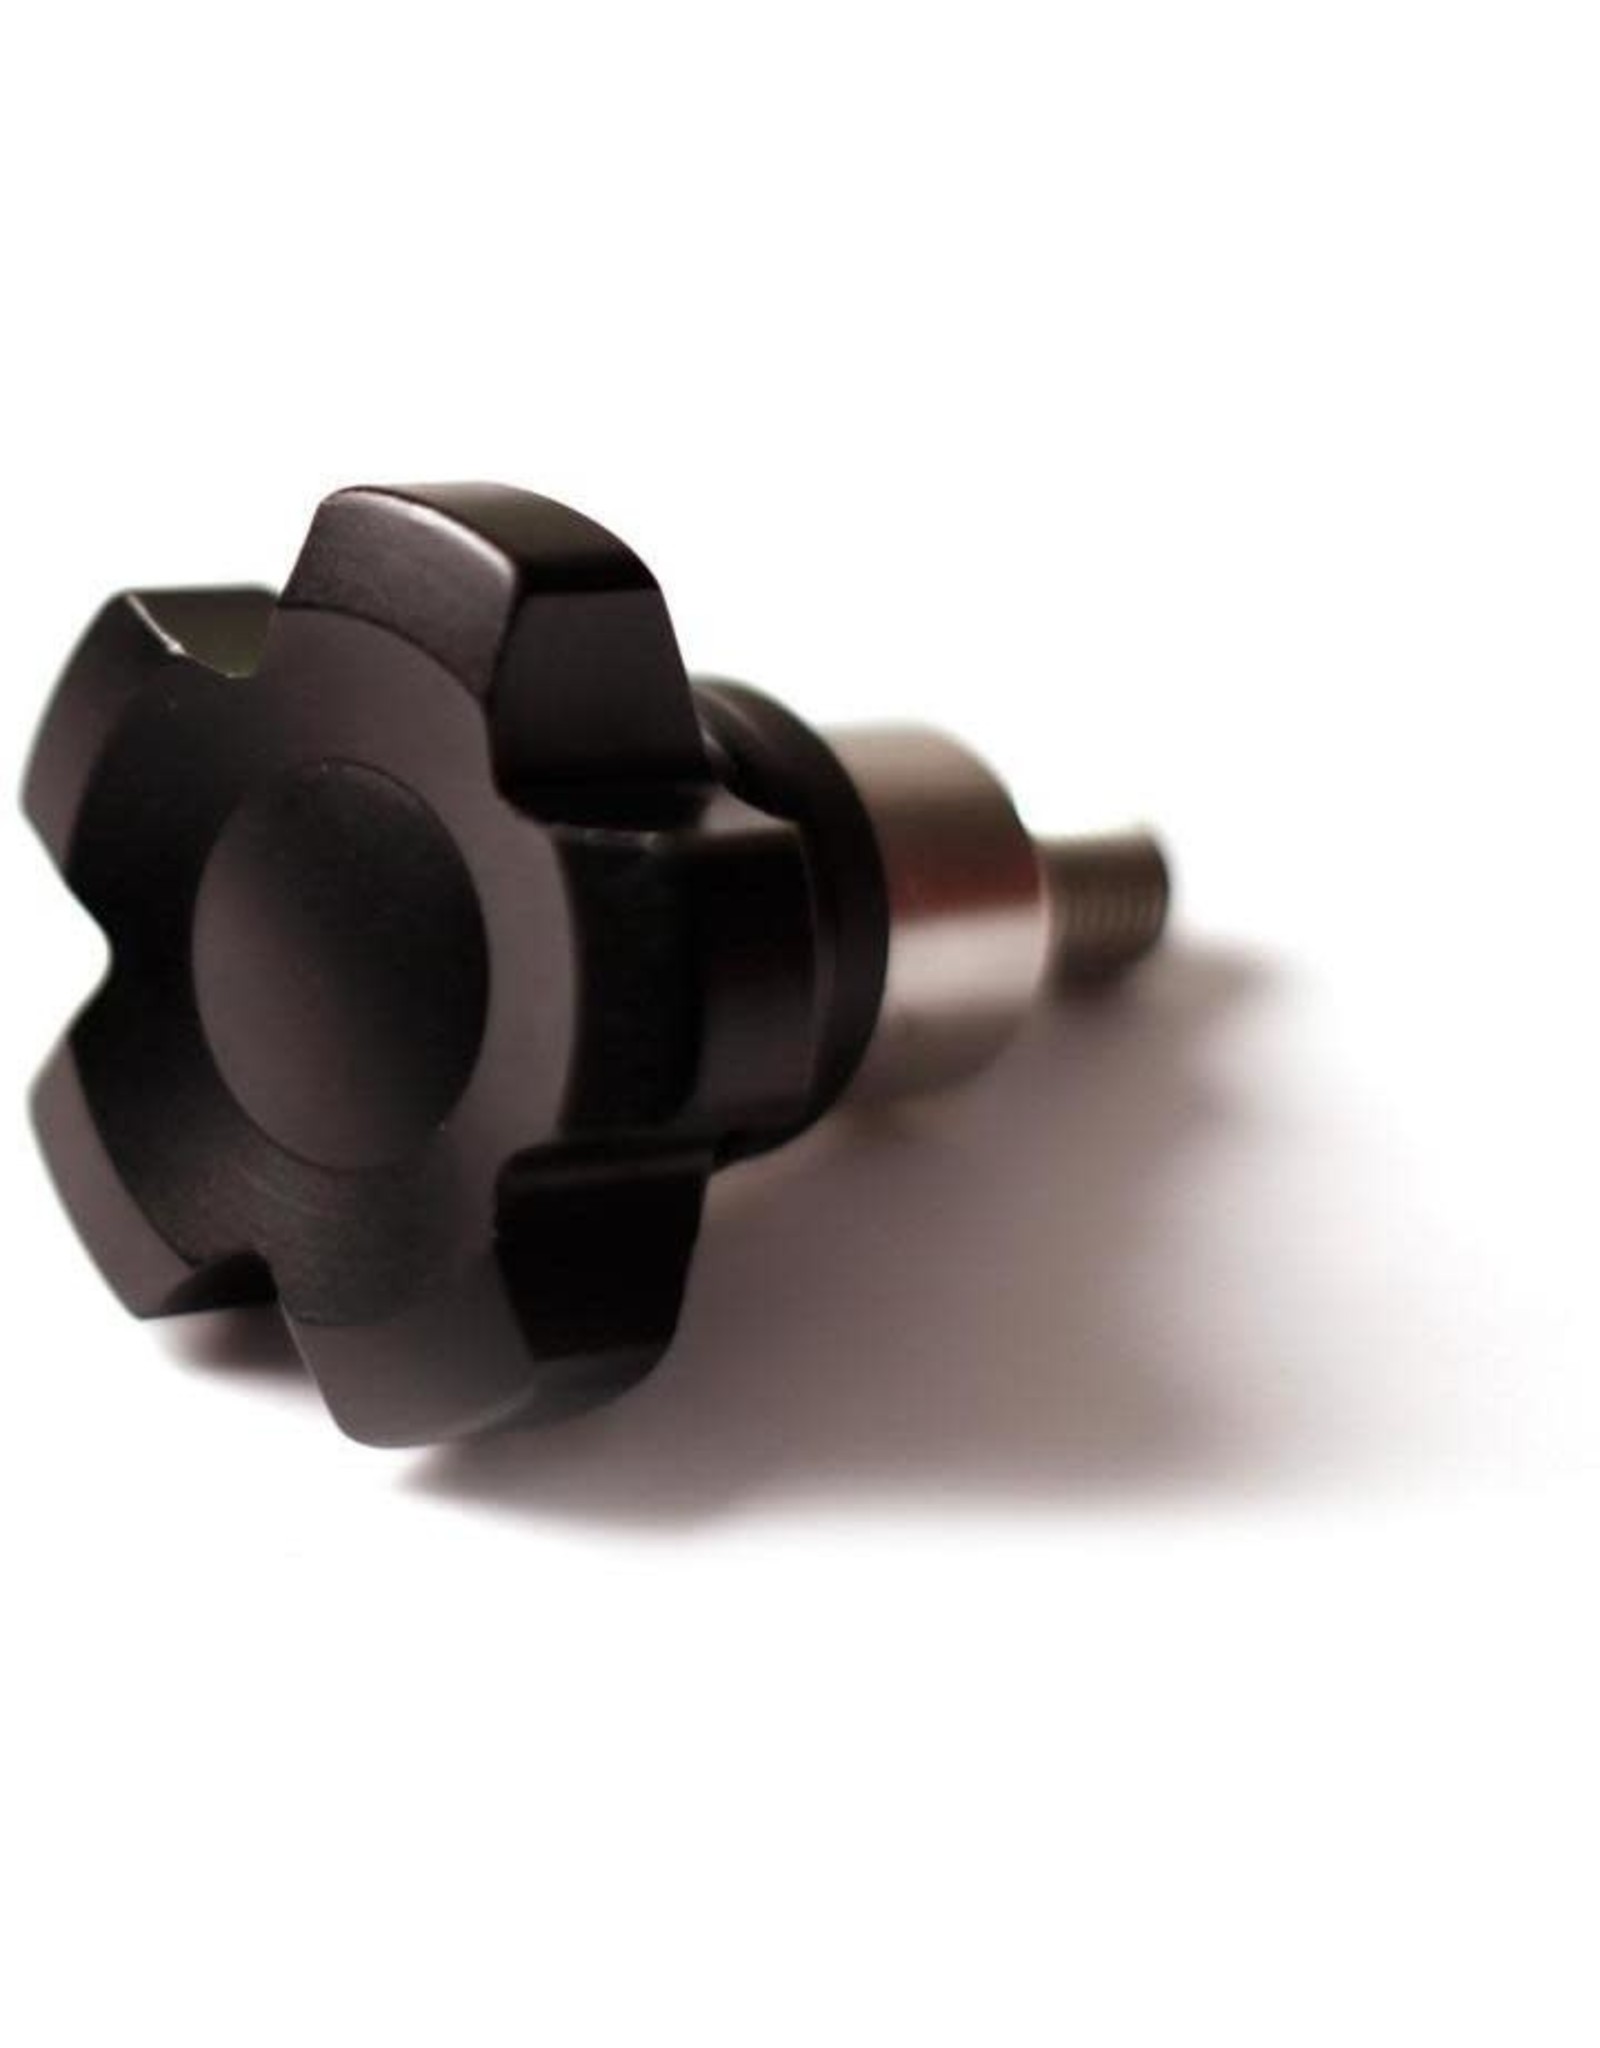 Celestron Celestron Mount Stud lock knob compatible only for the CGEPro series